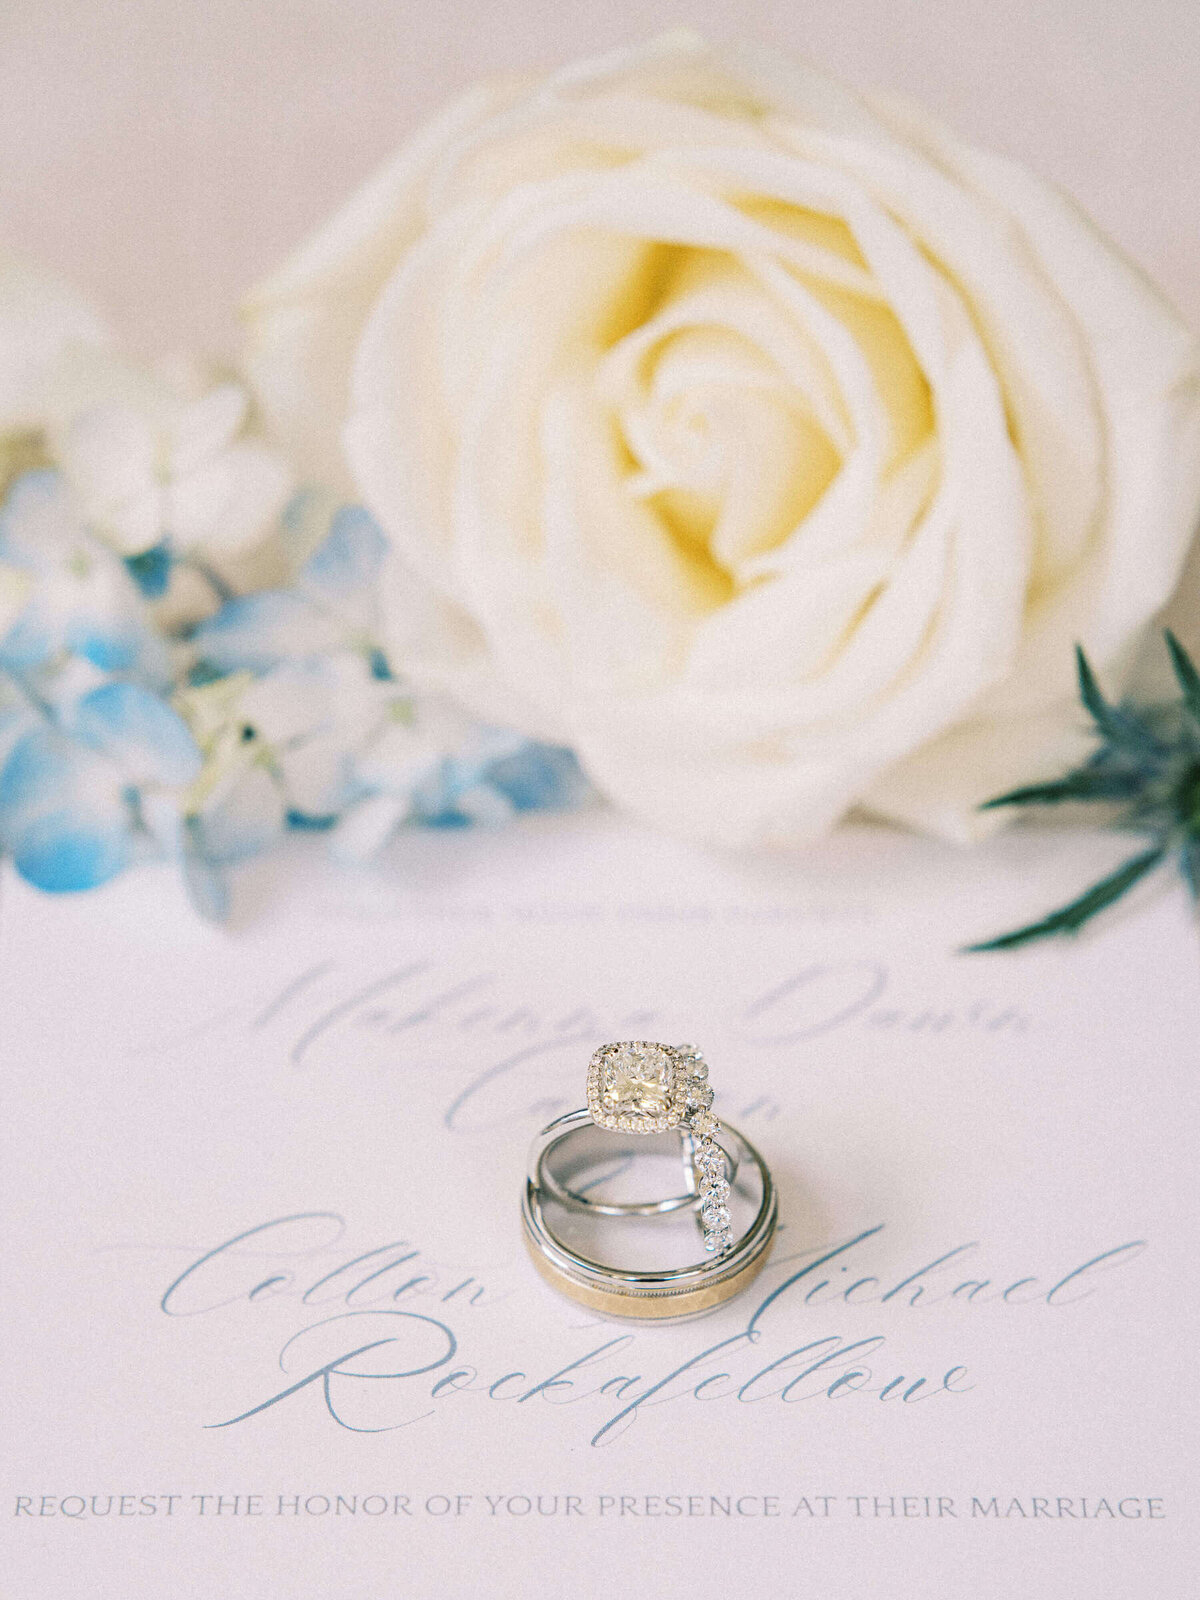 Bride and groom's rings showcased on wedding suite with white rose